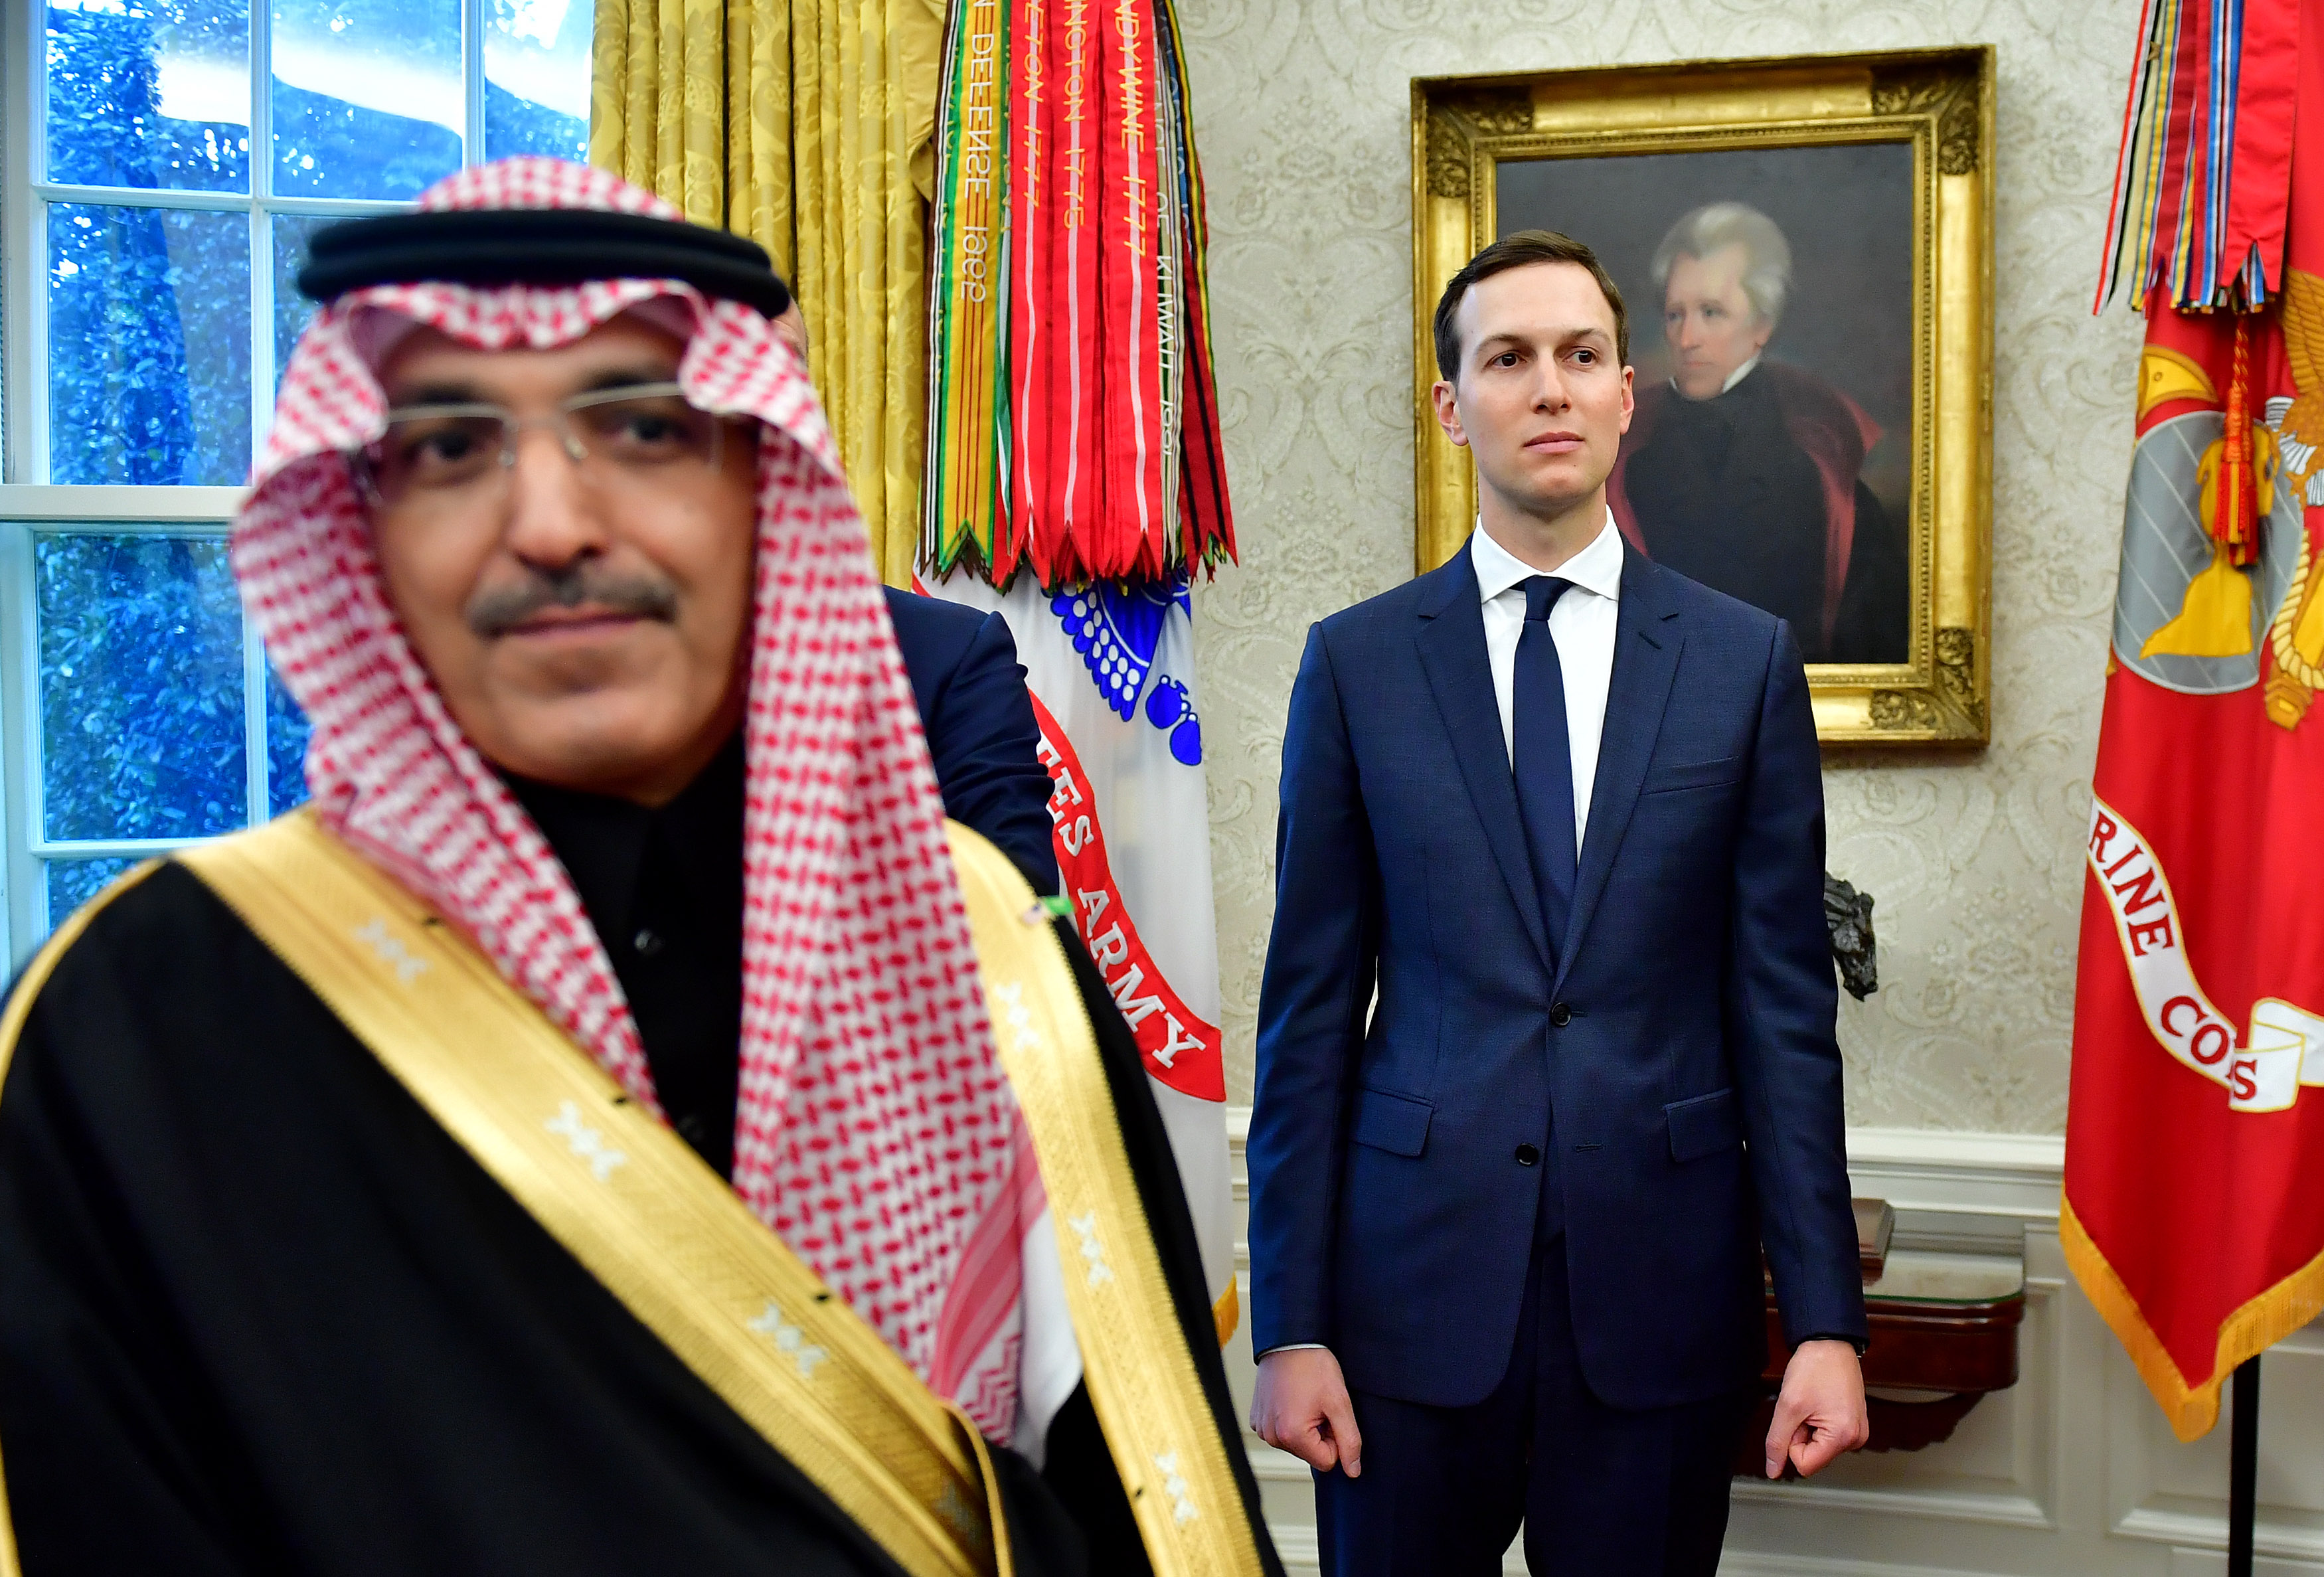 WASHINGTON, DC - MARCH 20: White House Advisor Jared Kushner, watches alongside a member of the Saudi Delegation during a meeting between President Donald Trump and Crown Prince Mohammed bin Salman of the Kingdom of Saudi Arabia in the Oval Office at the White House on March 20, 2018 in Washington, D.C. (Photo by Kevin Dietsch-Pool/Getty Images)